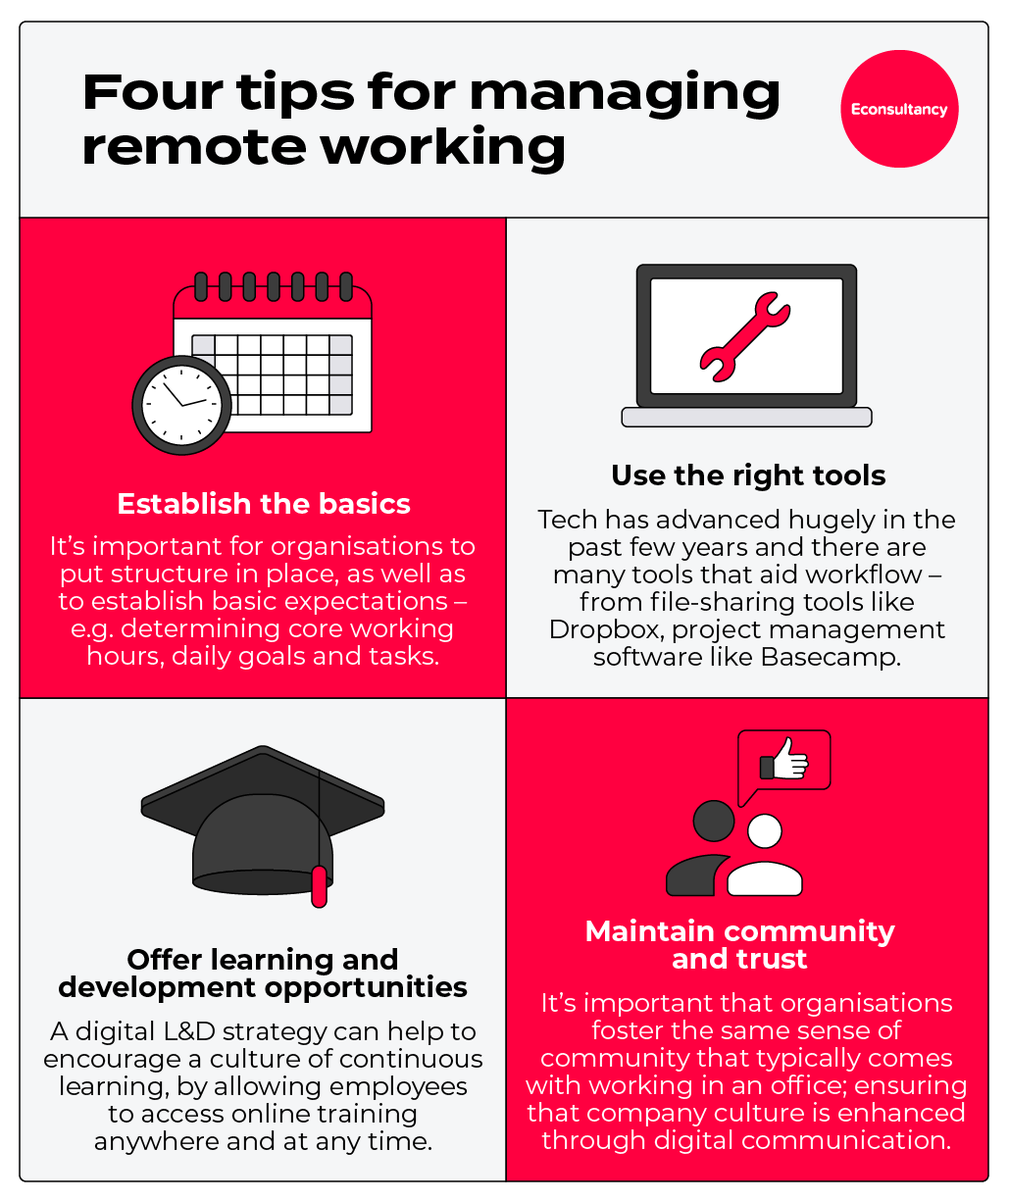 Four tips for managing remote working bit.ly/3cE5b35